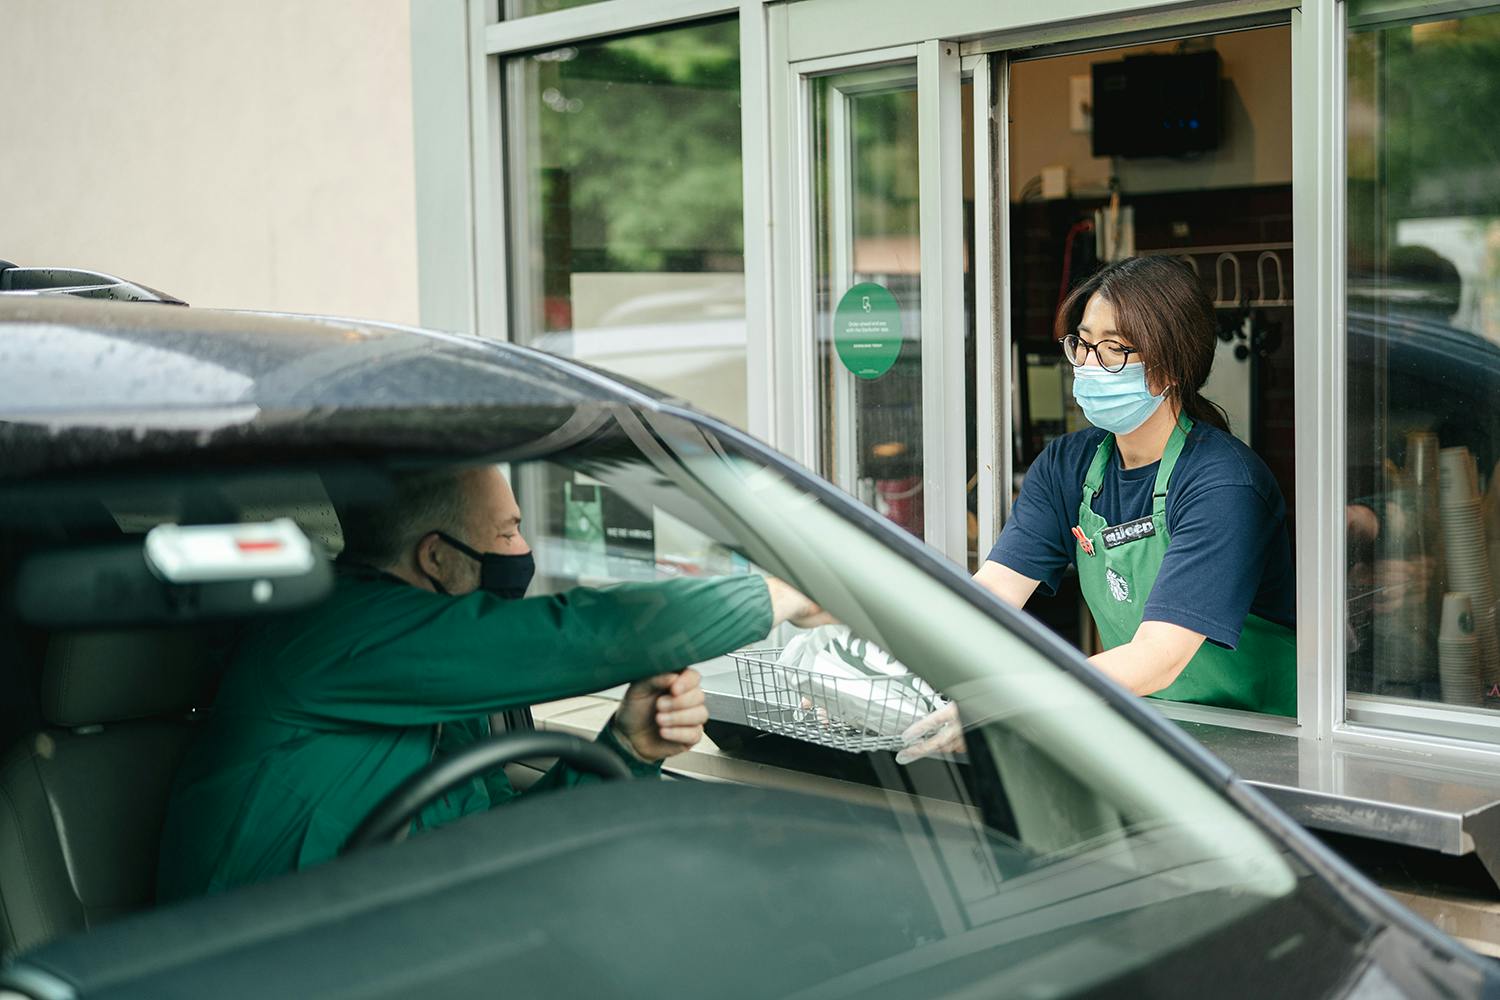 A Starbucks employee giving an order to a customer in their vehicle through the drive-thru window.